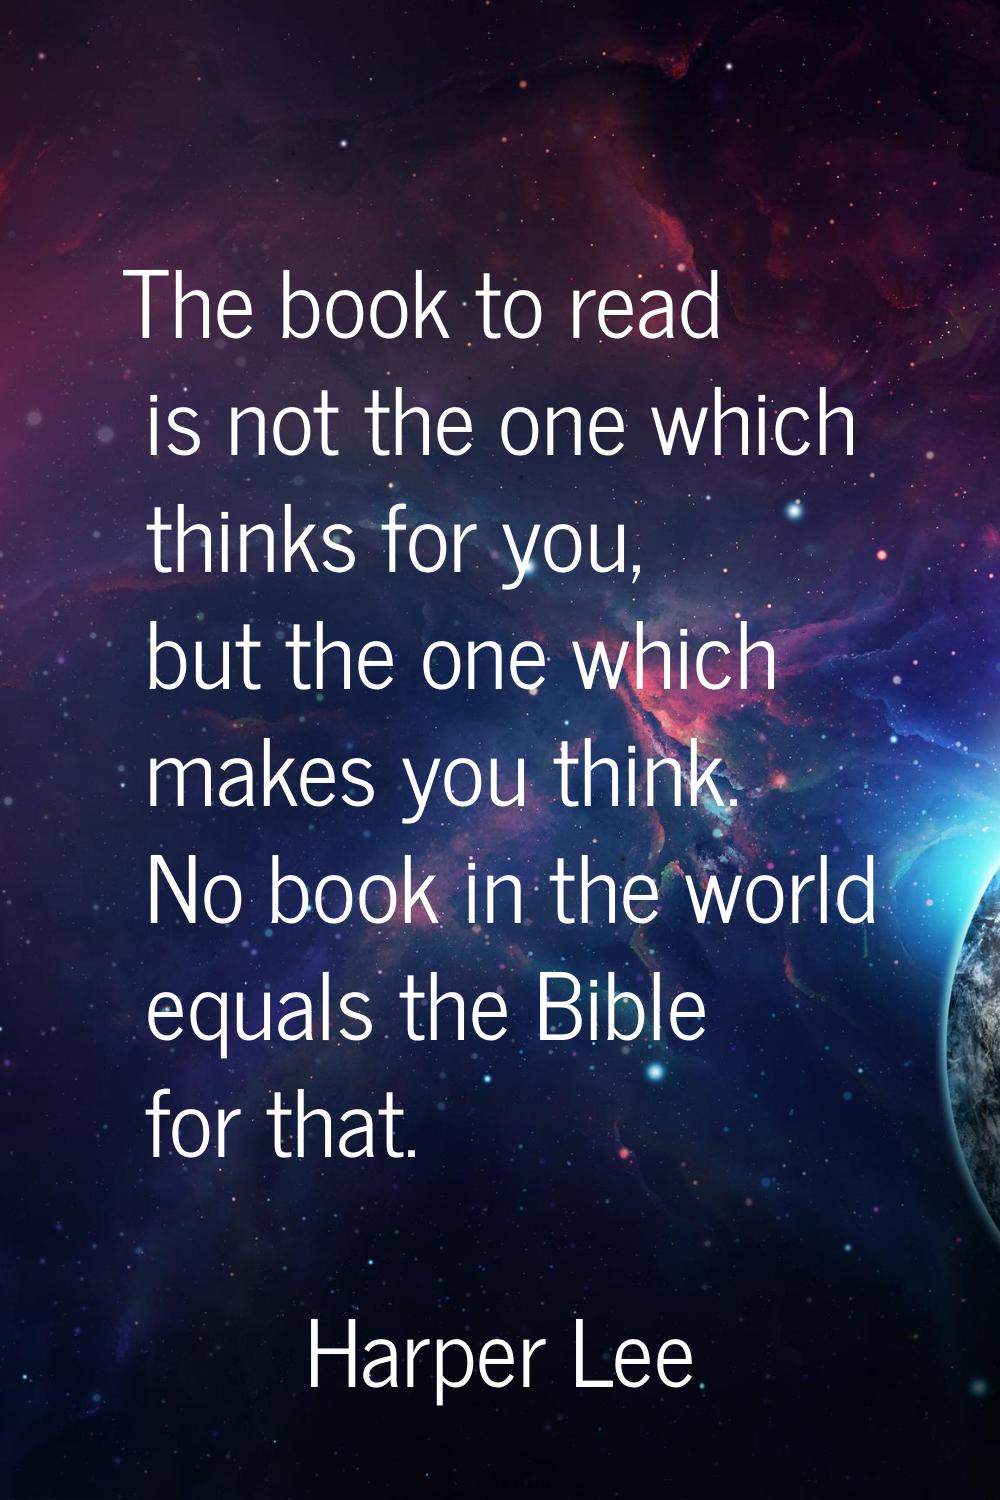 The book to read is not the one which thinks for you, but the one which makes you think. No book in